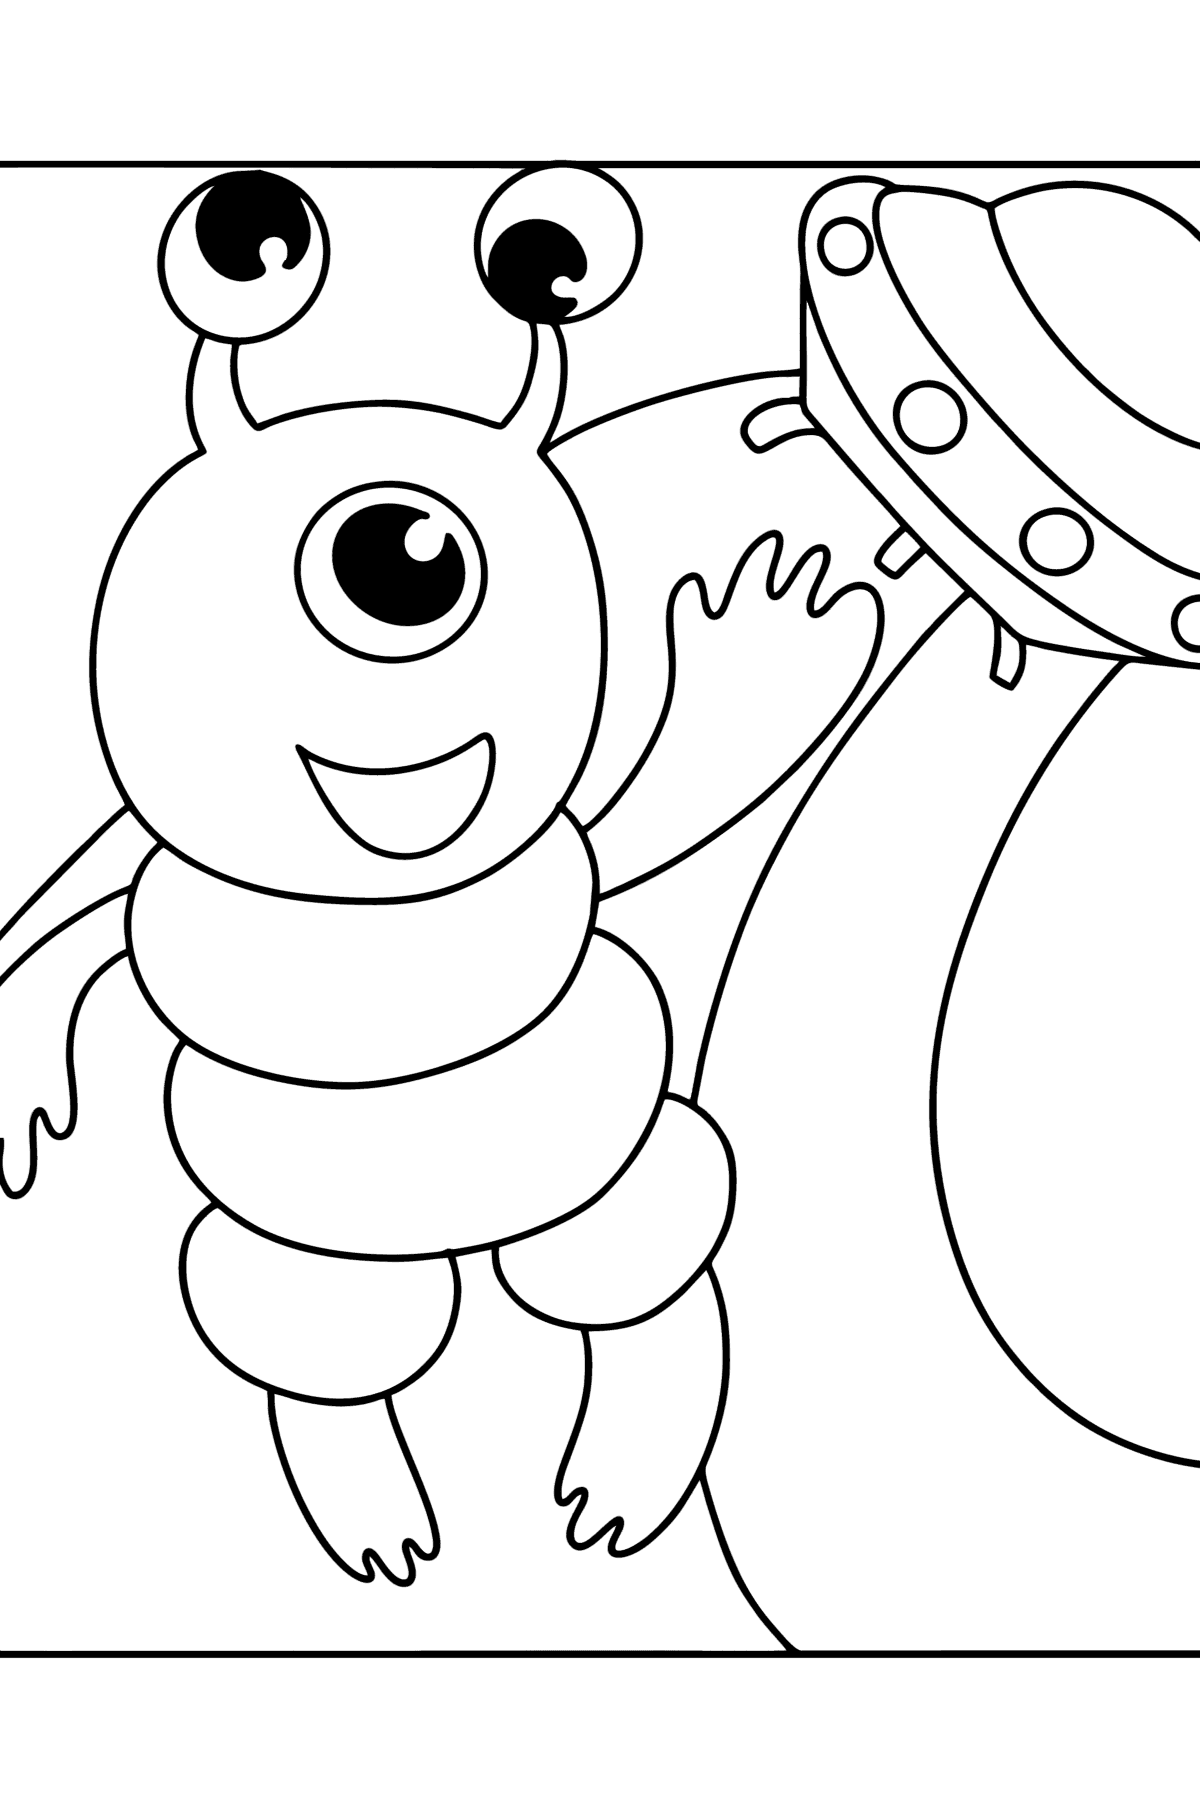 Alien in space coloring page - Coloring Pages for Kids